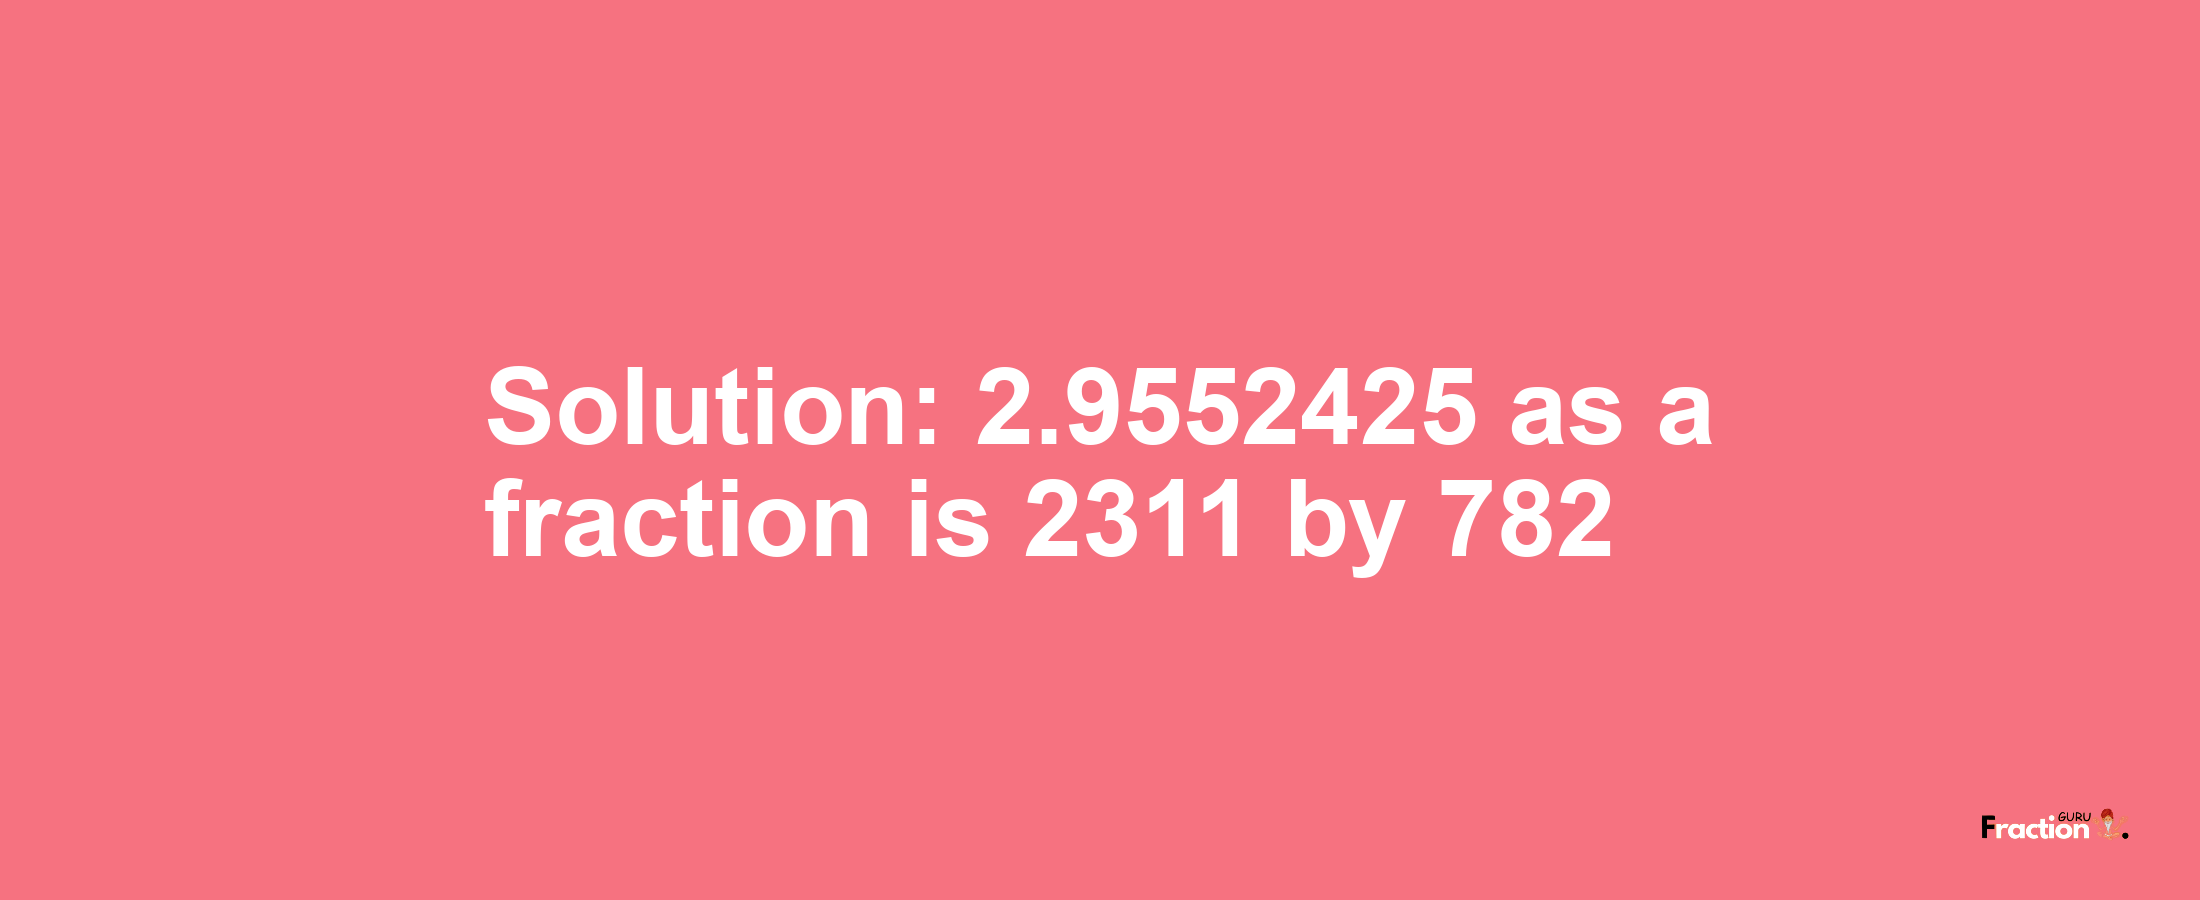 Solution:2.9552425 as a fraction is 2311/782